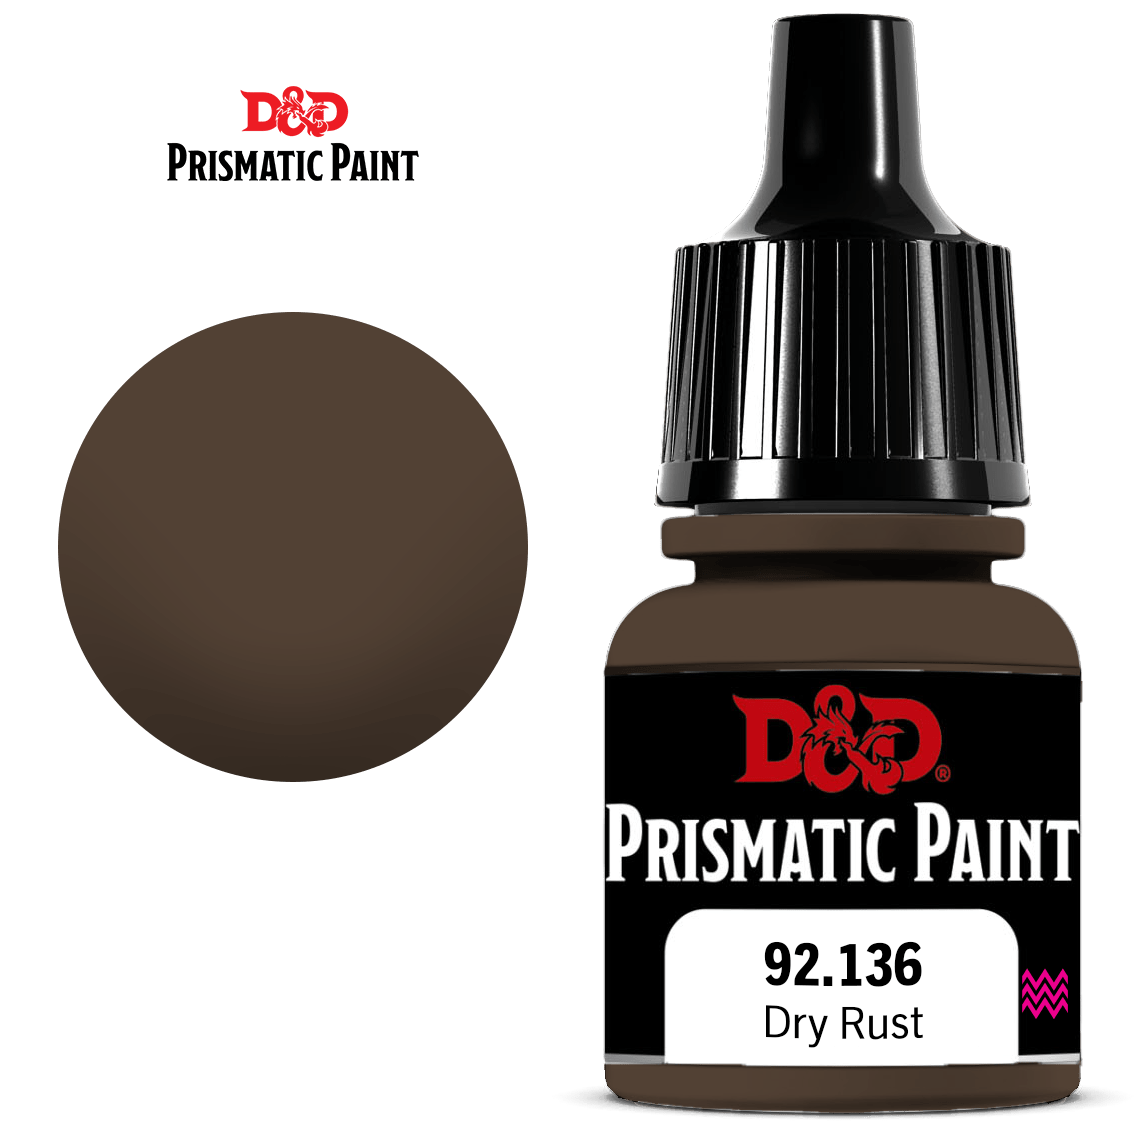 PRISMATIC PAINT: DRY RUST EFFECT | BD Cosmos